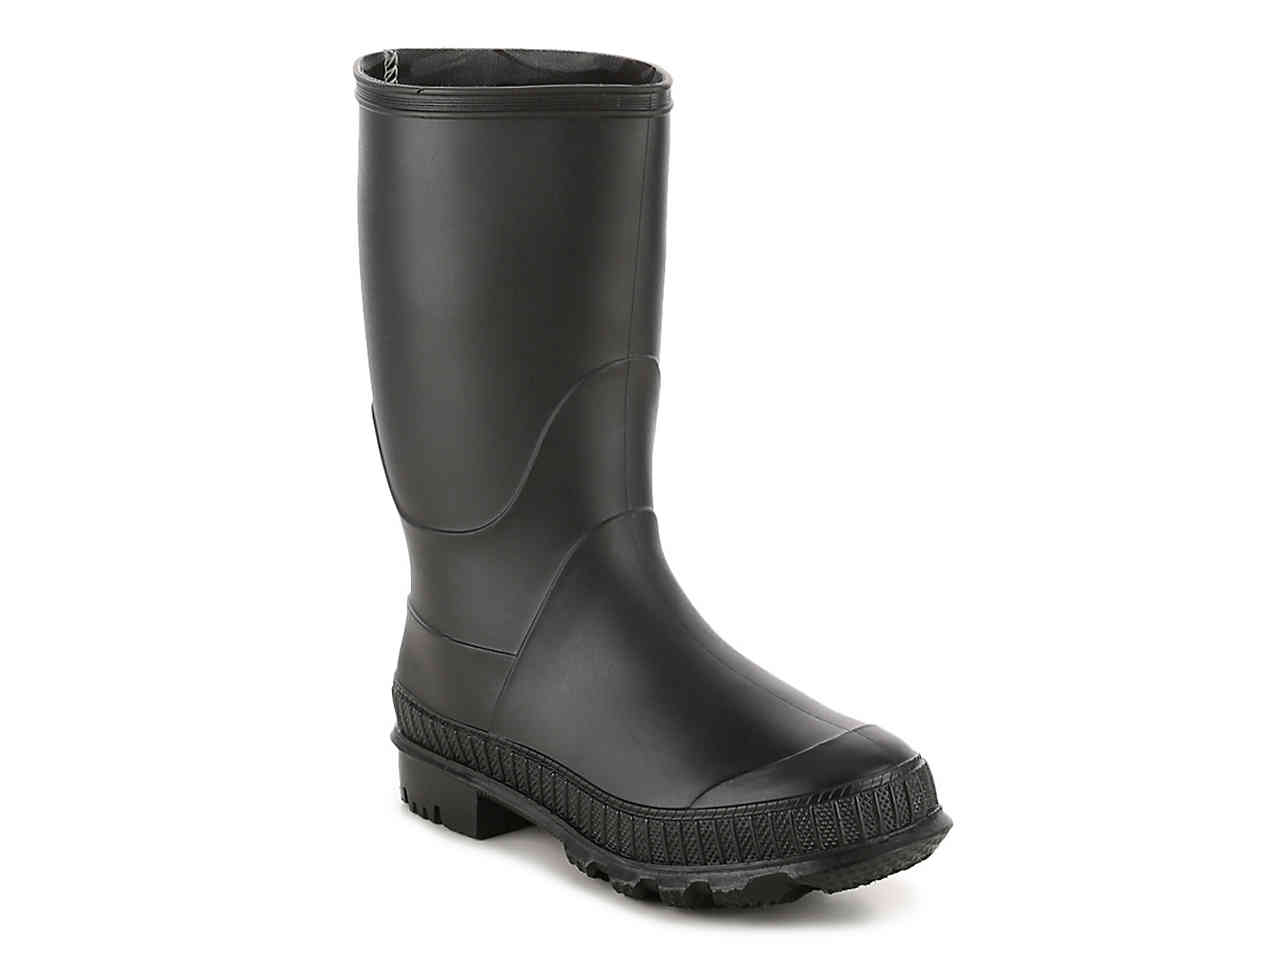 boys boots carters youth rain boot INGNXCD